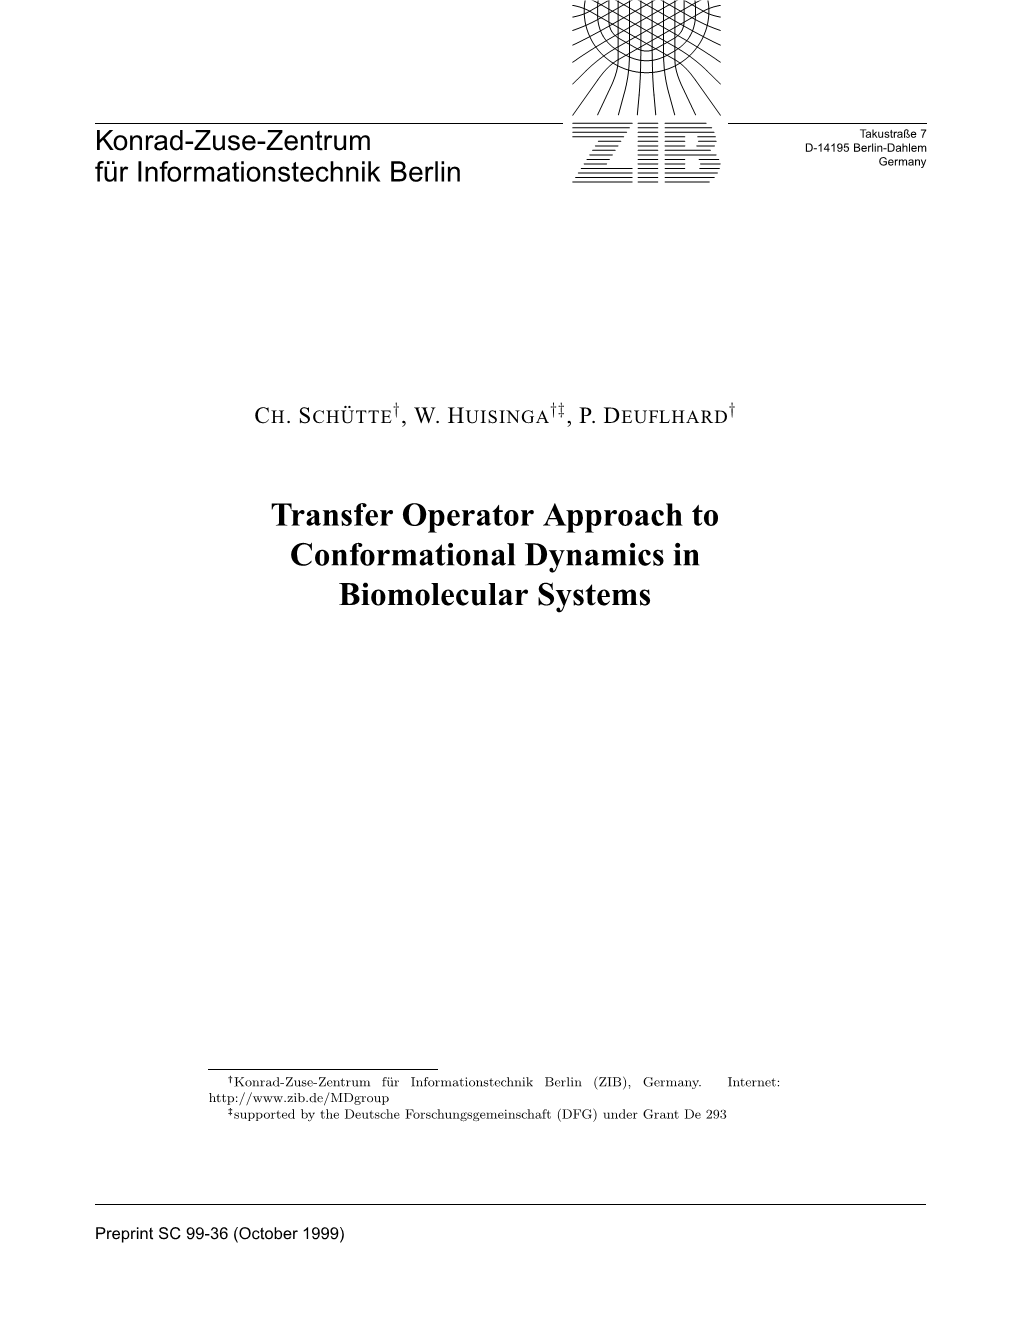 Transfer Operator Approach to Conformational Dynamics in Biomolecular Systems